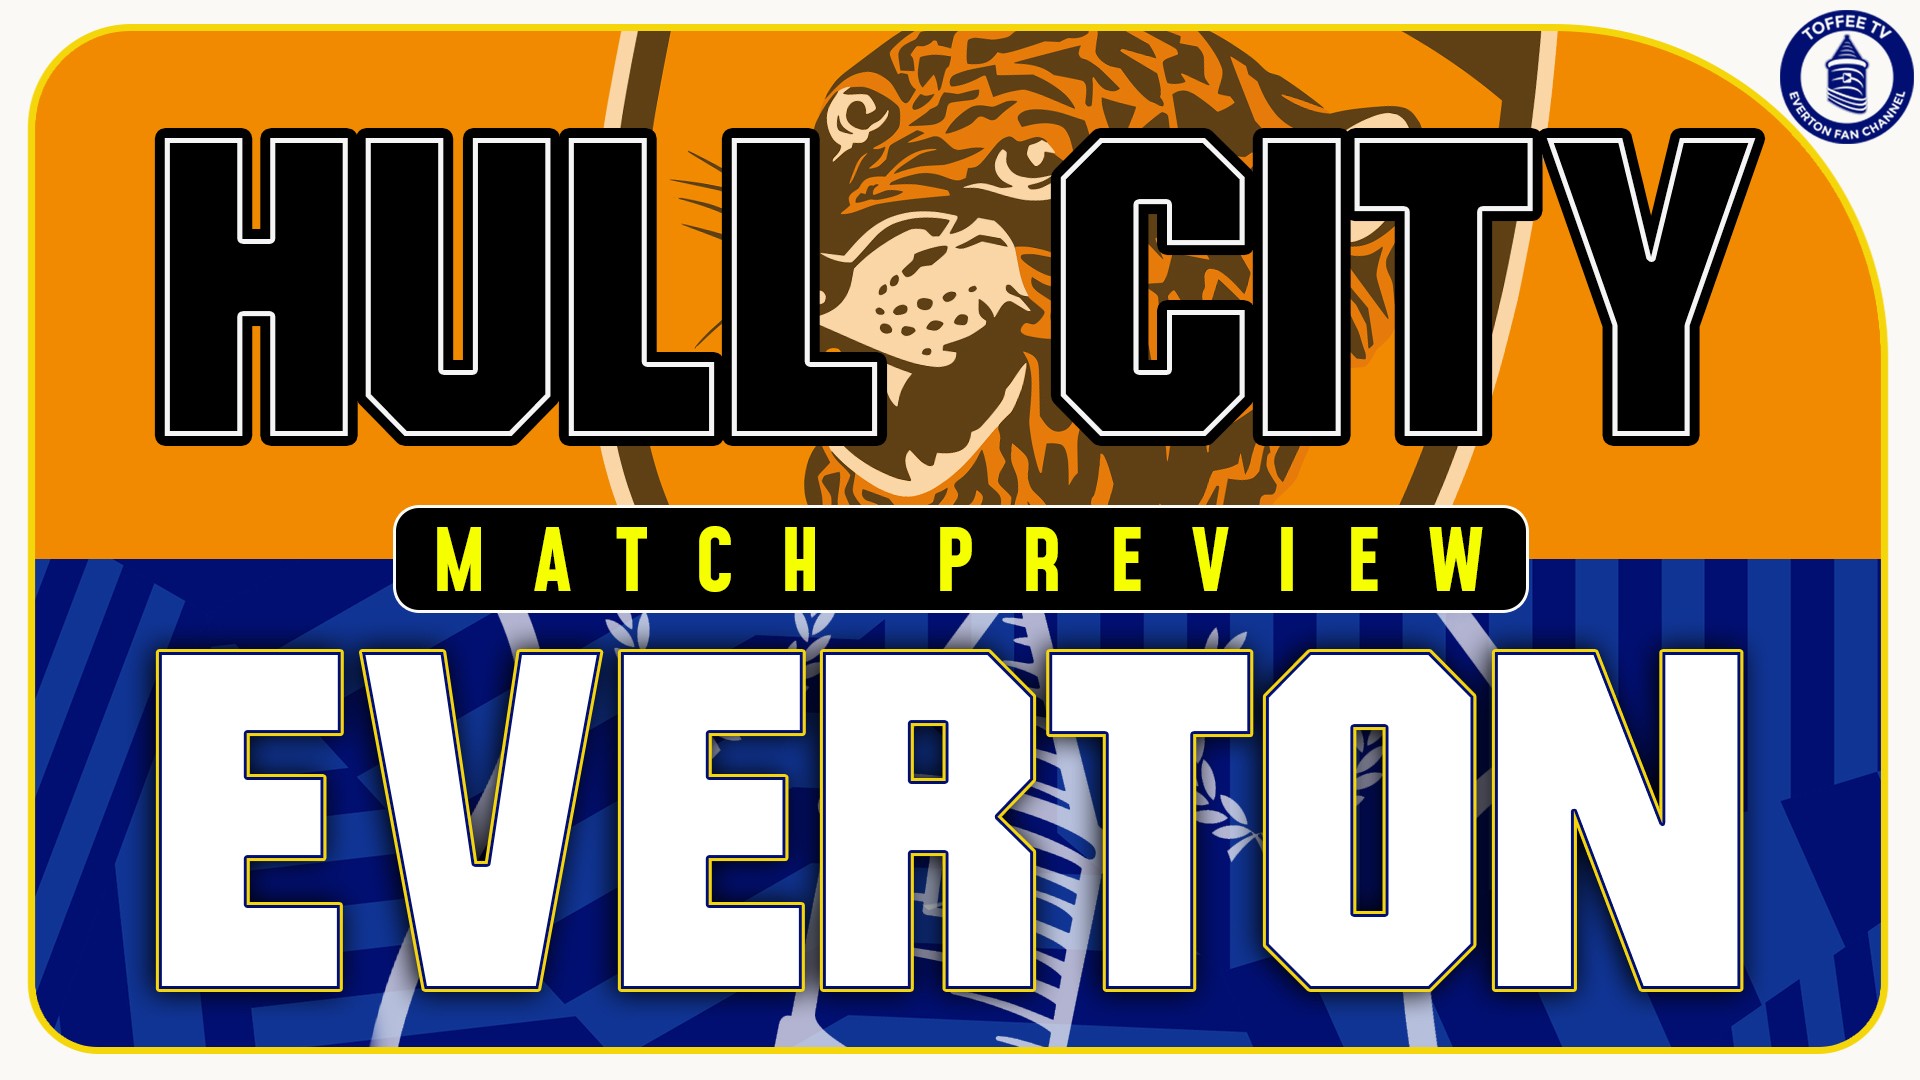 Featured image for “Hull City V Everton | Match Preview”